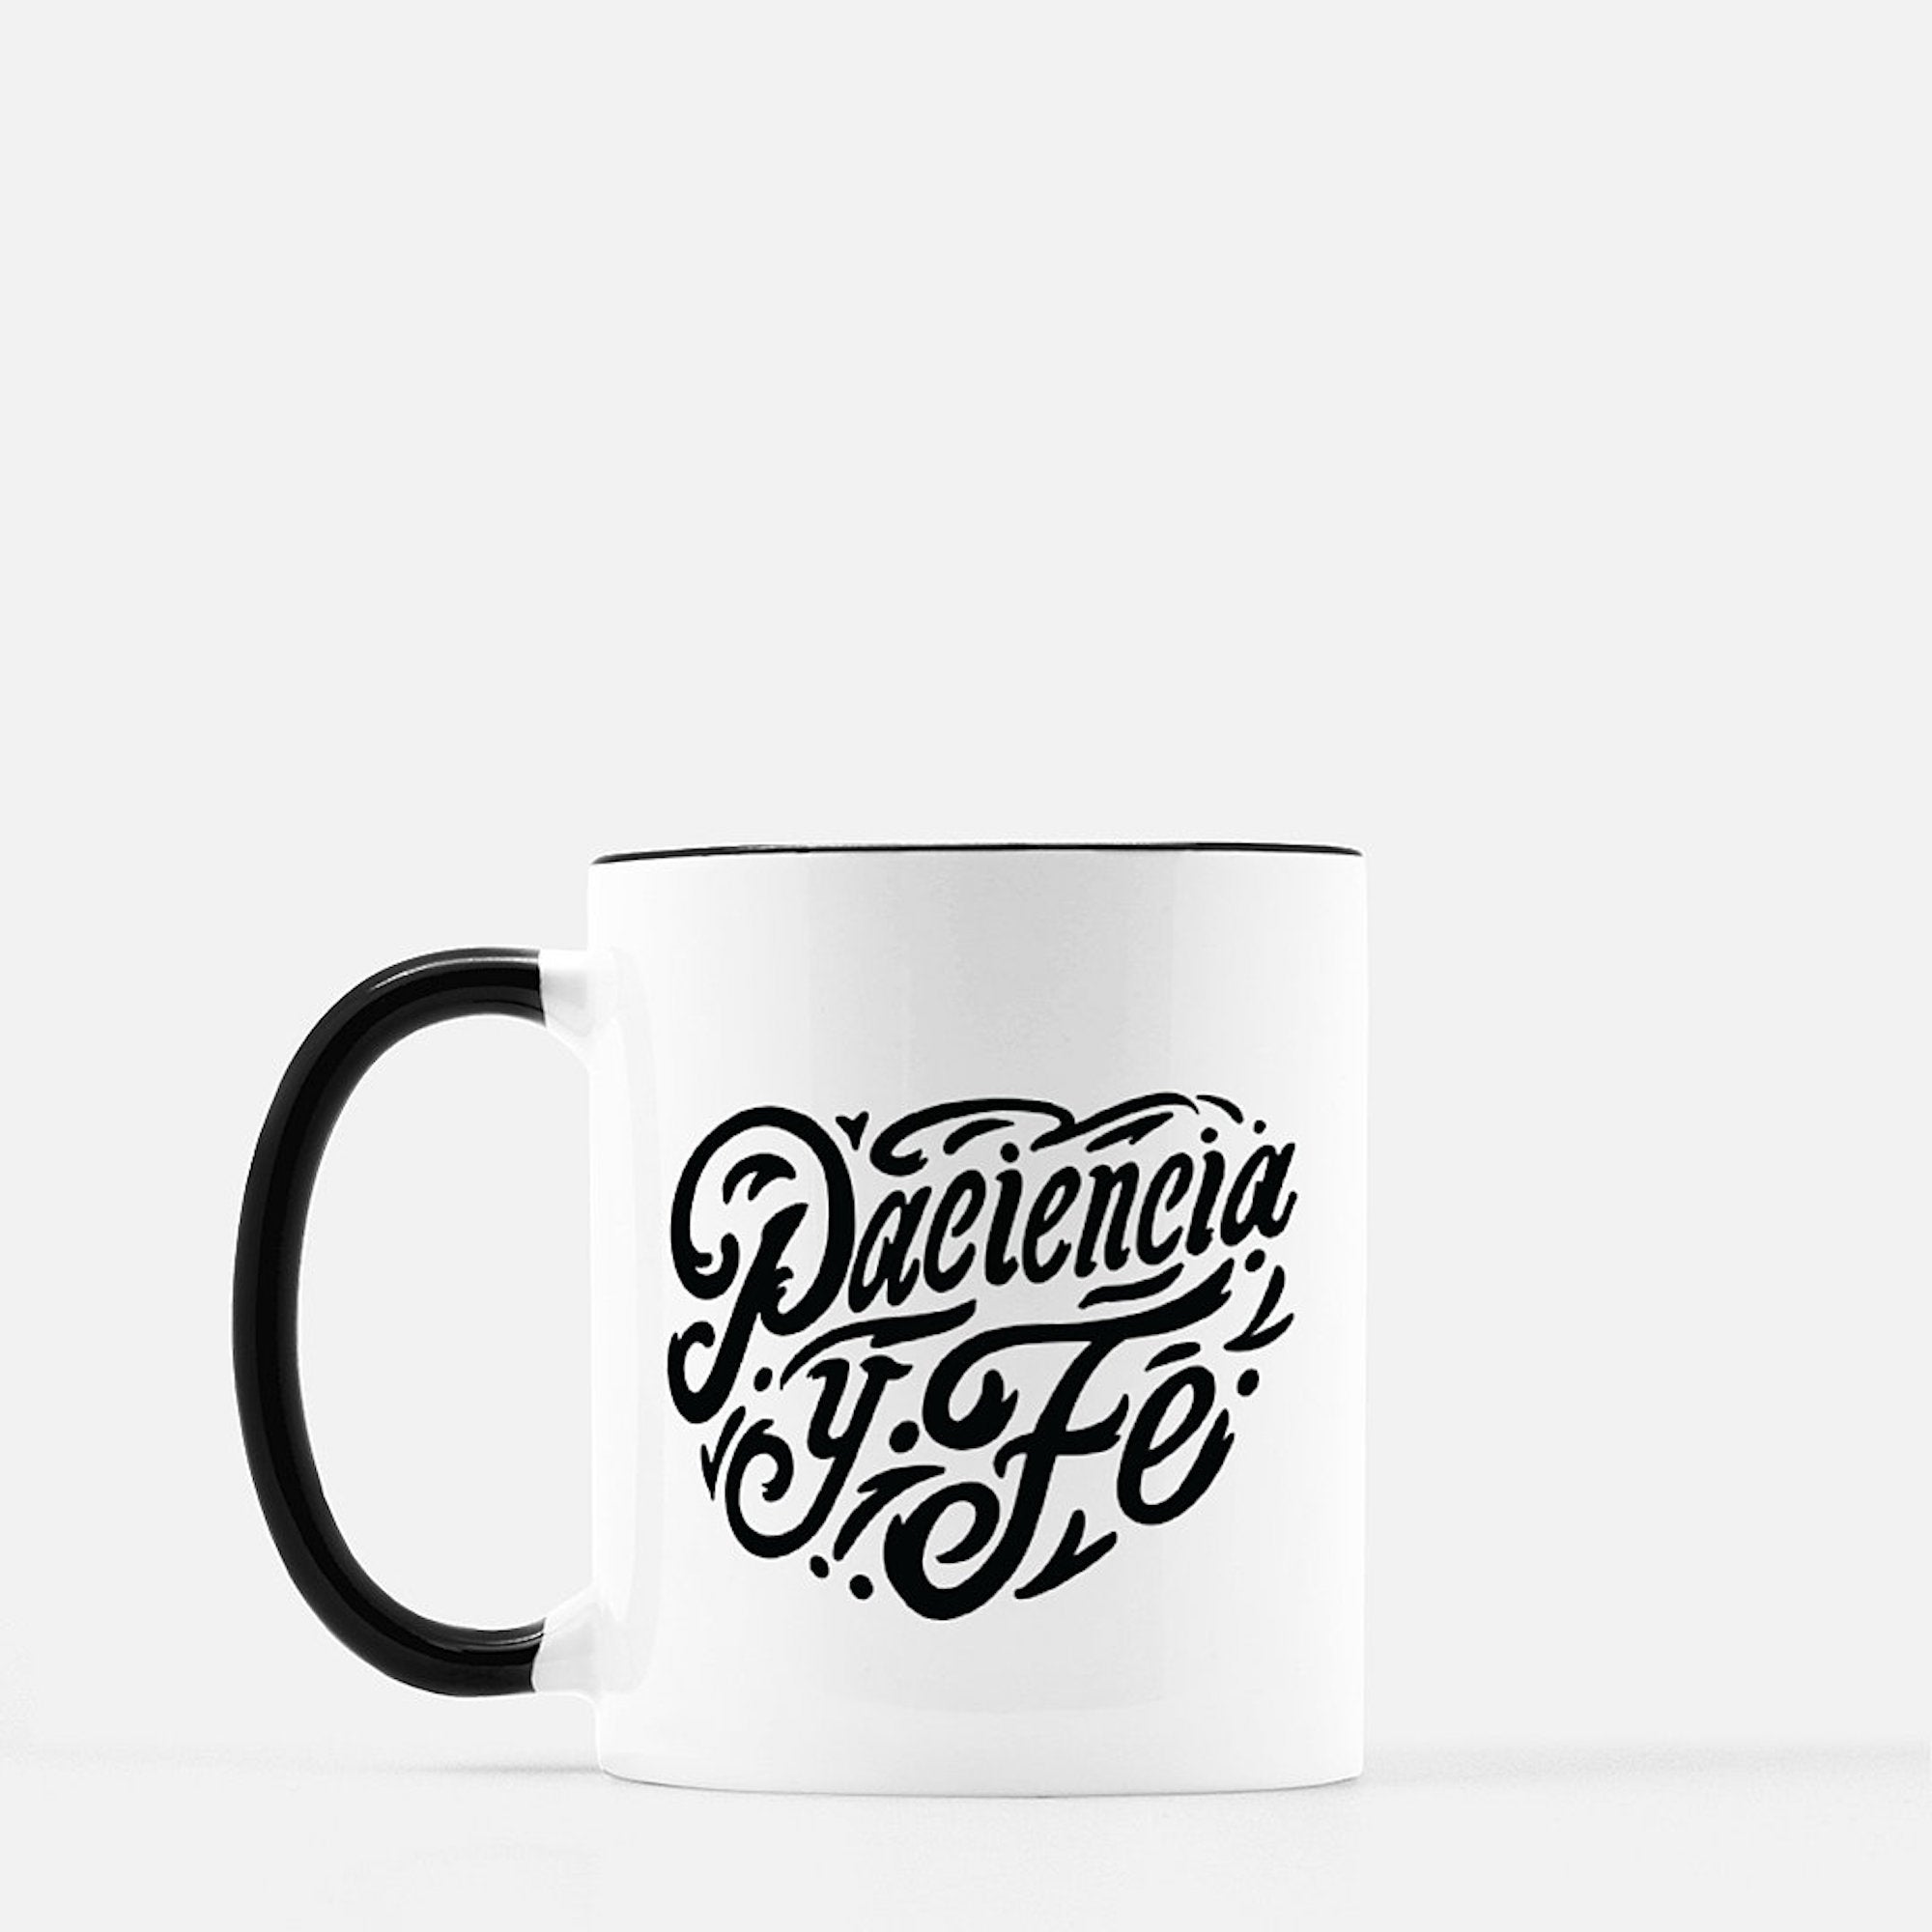 Paciencia y Fe Mug (In the Heights Inspired)